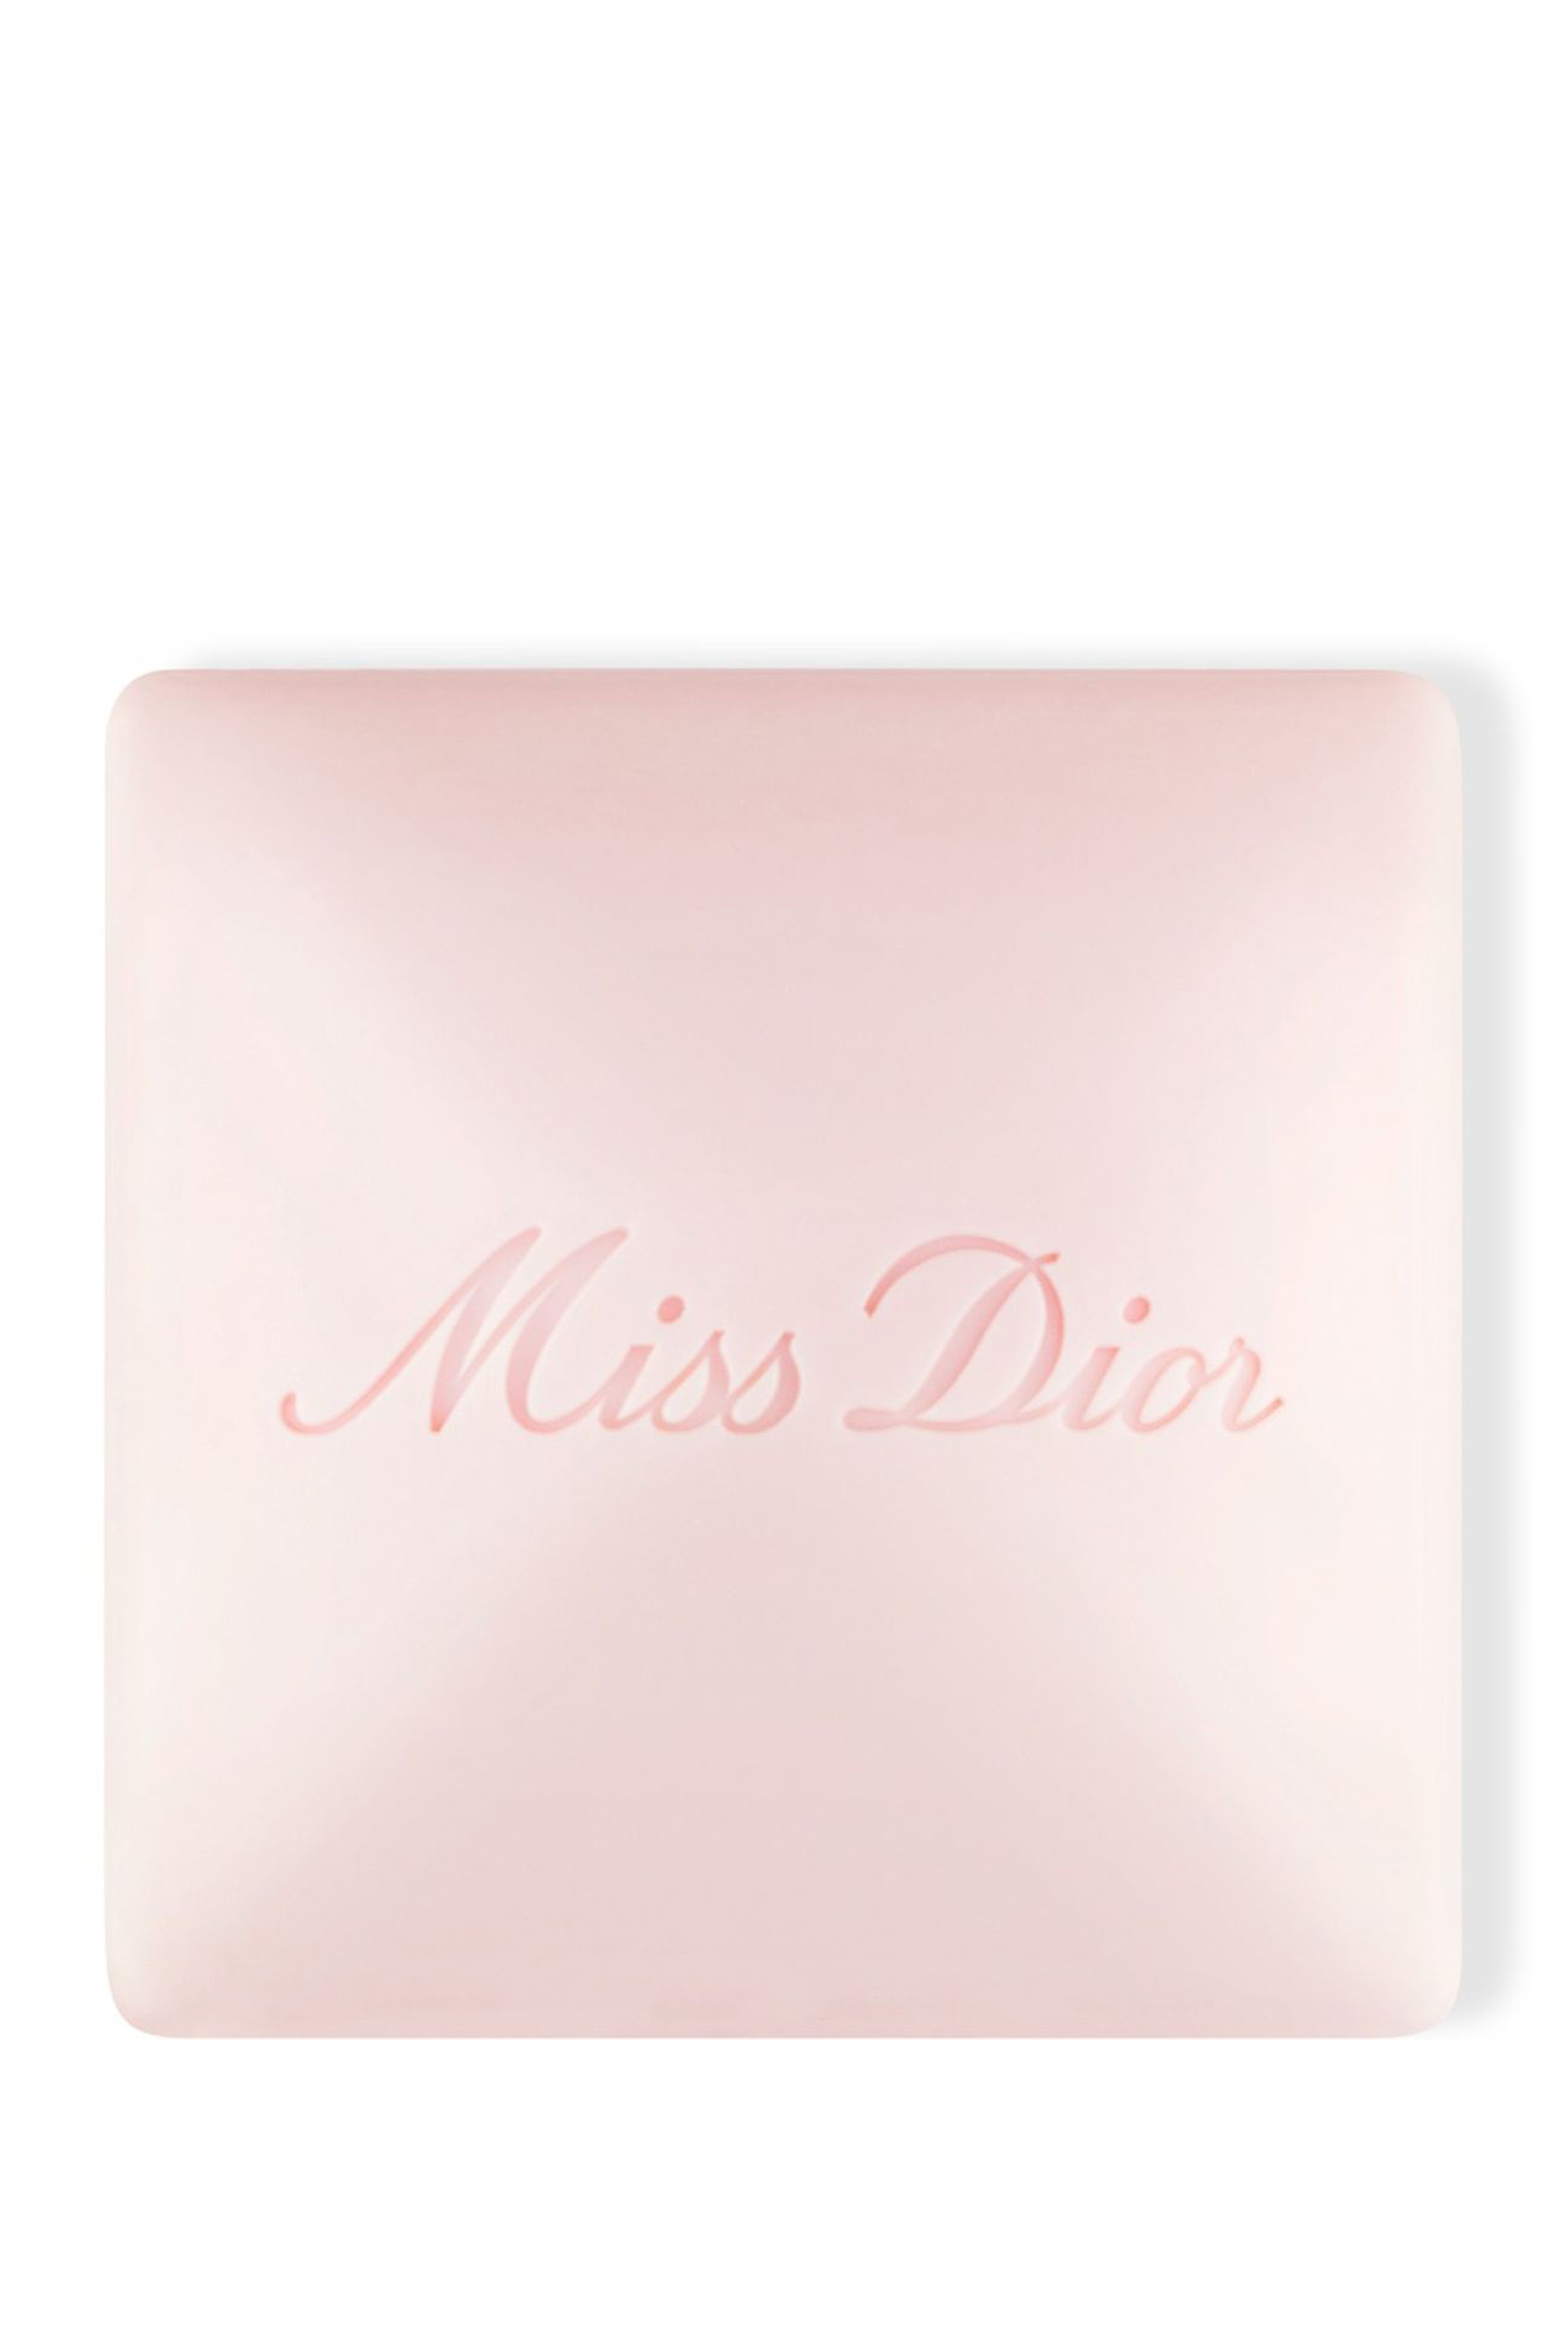 miss dior soap boots